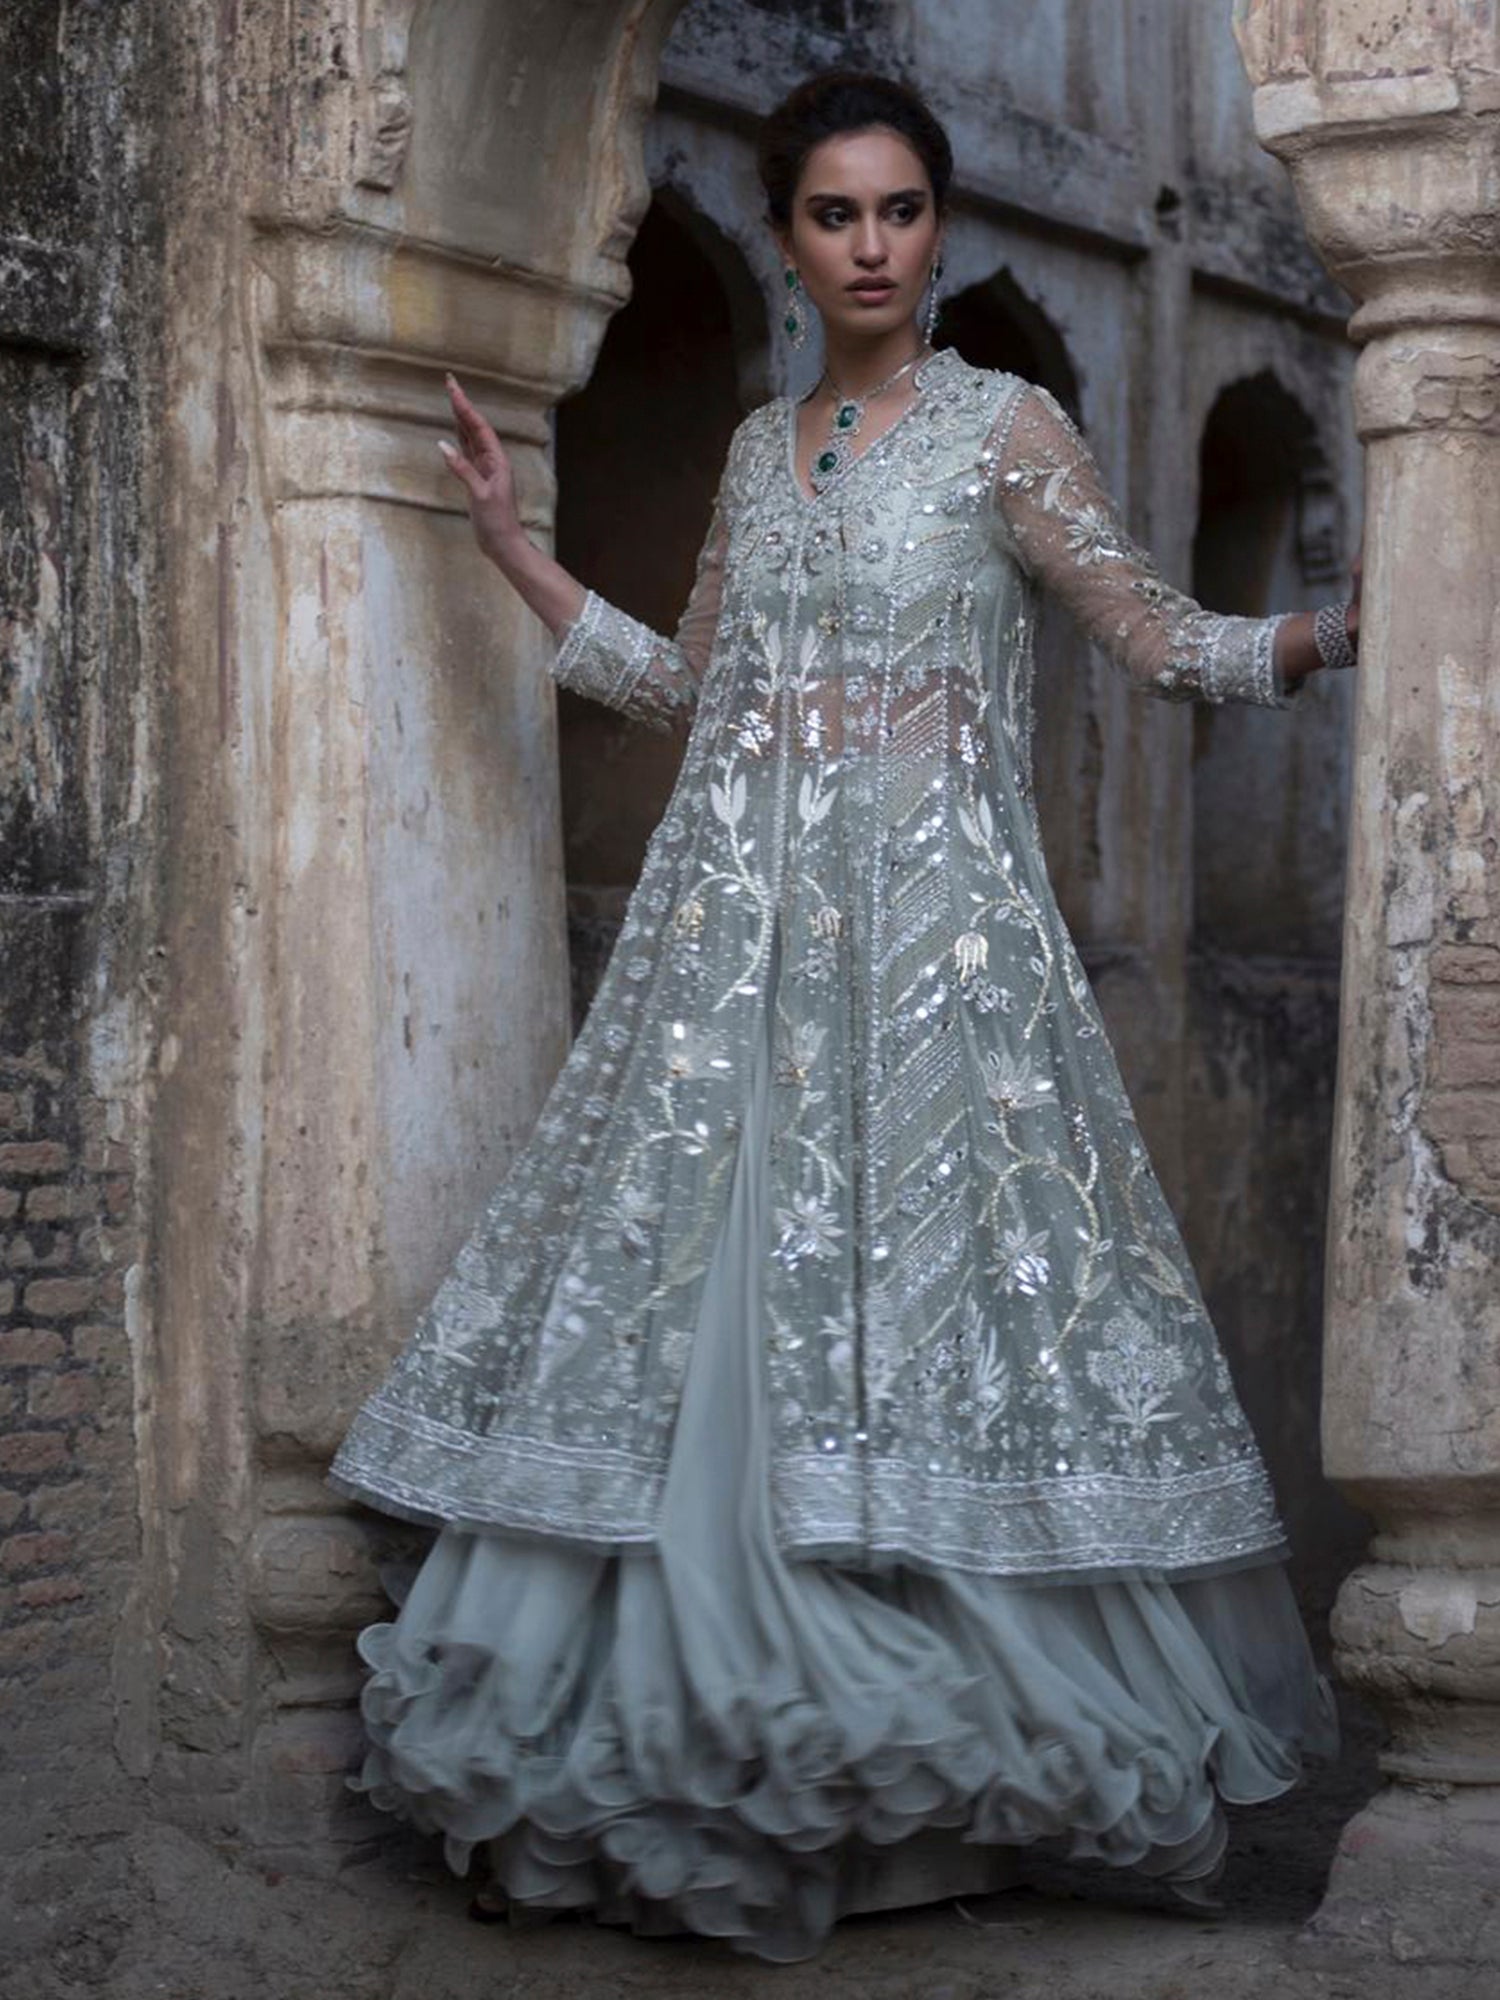 Buy Affordable Bridal Lehengas From These Designers Under INR 50K